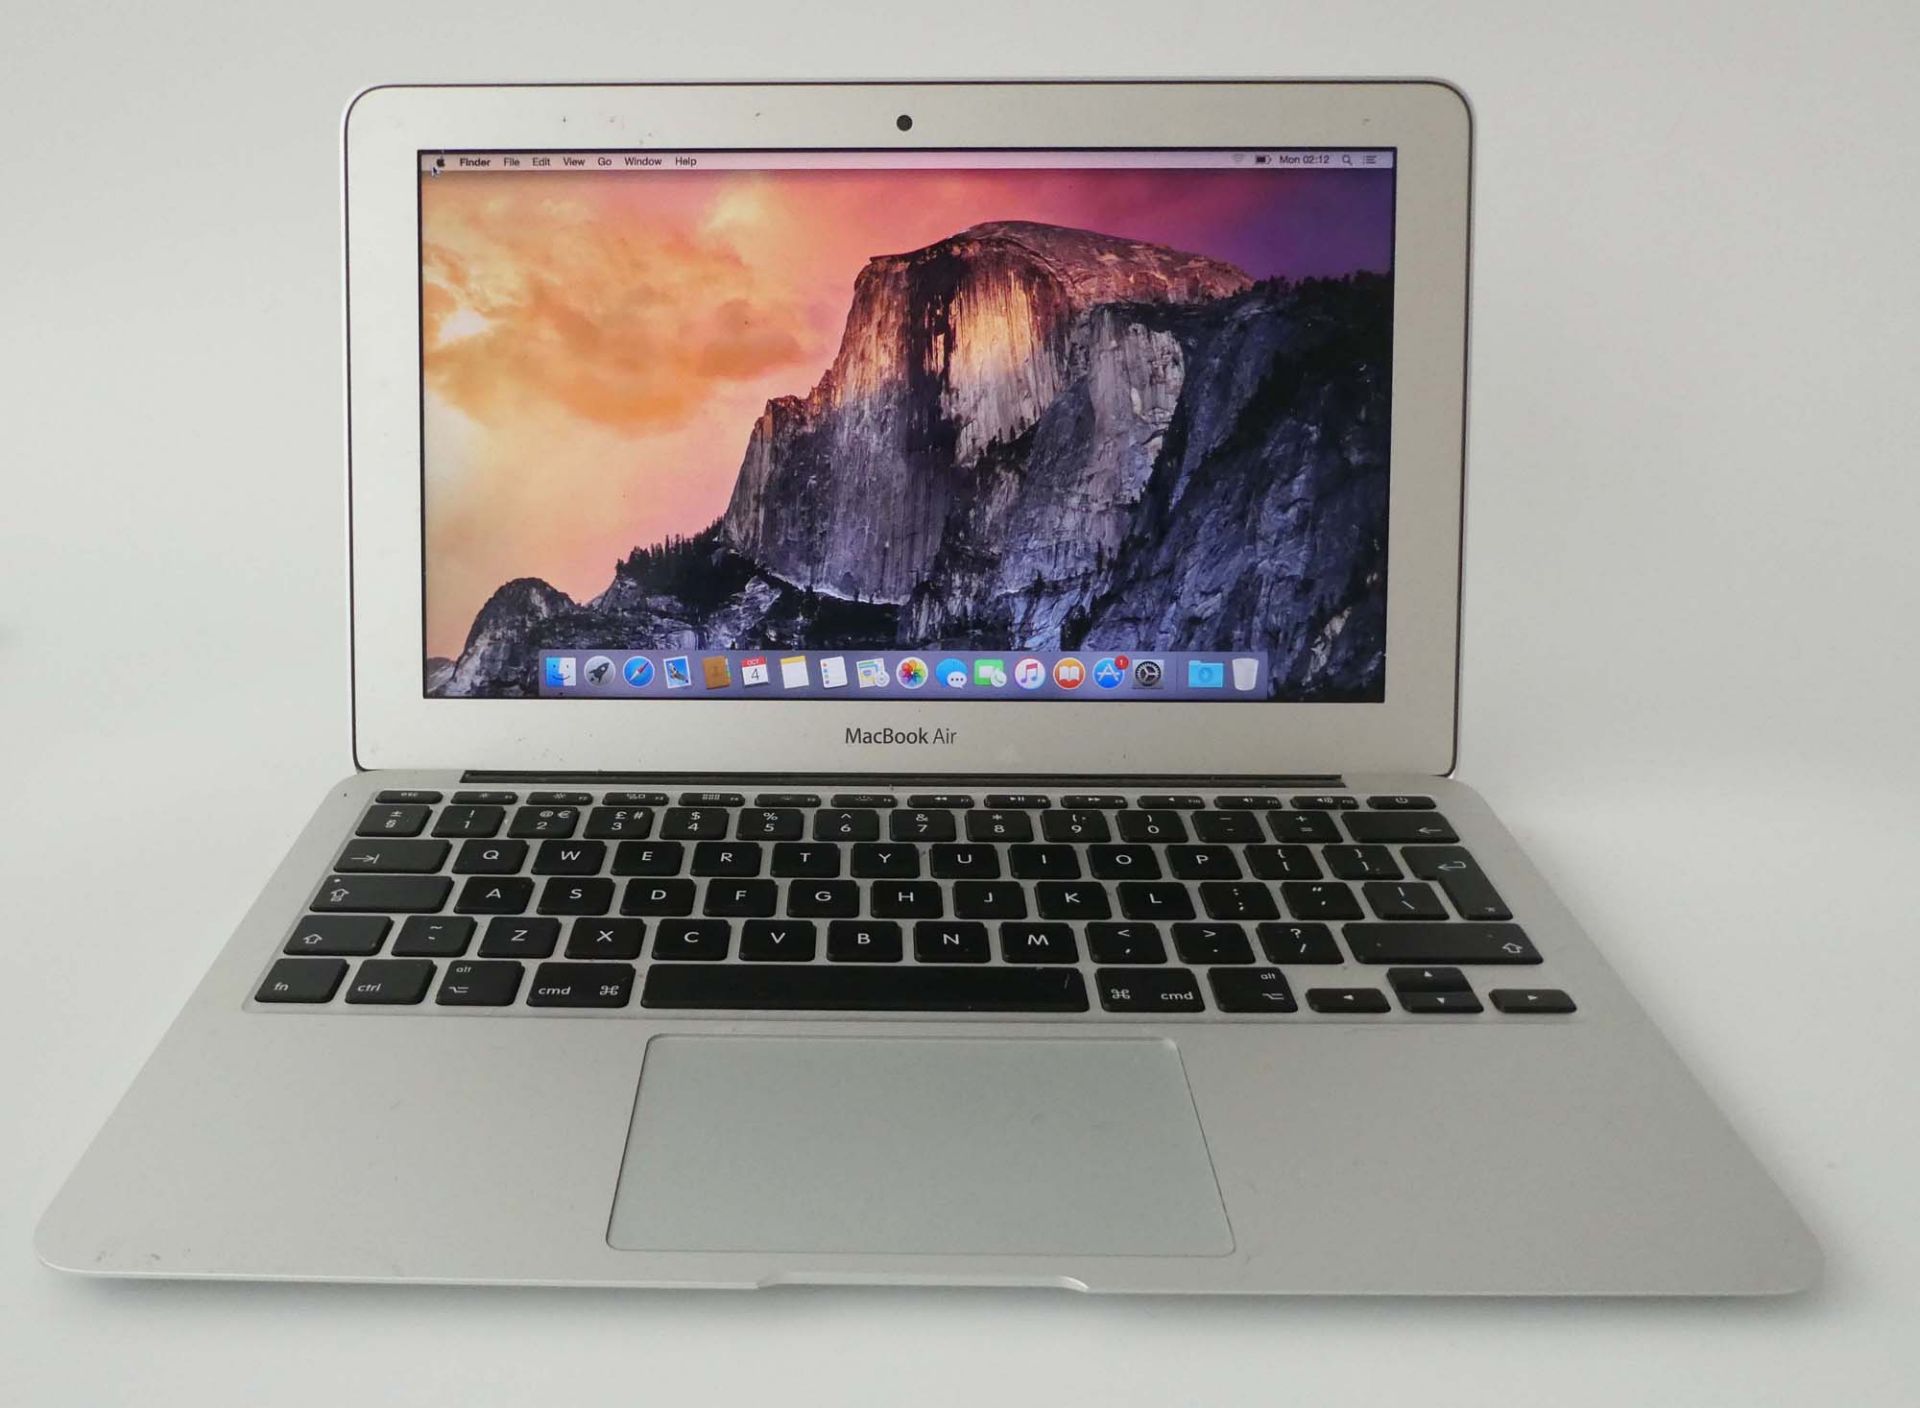 MacBook Air 2015 A1465 11'' laptop with Intel i5 @ 1.6GHz, 4GB RAM, 128GB SSD and PSU - Image 2 of 2